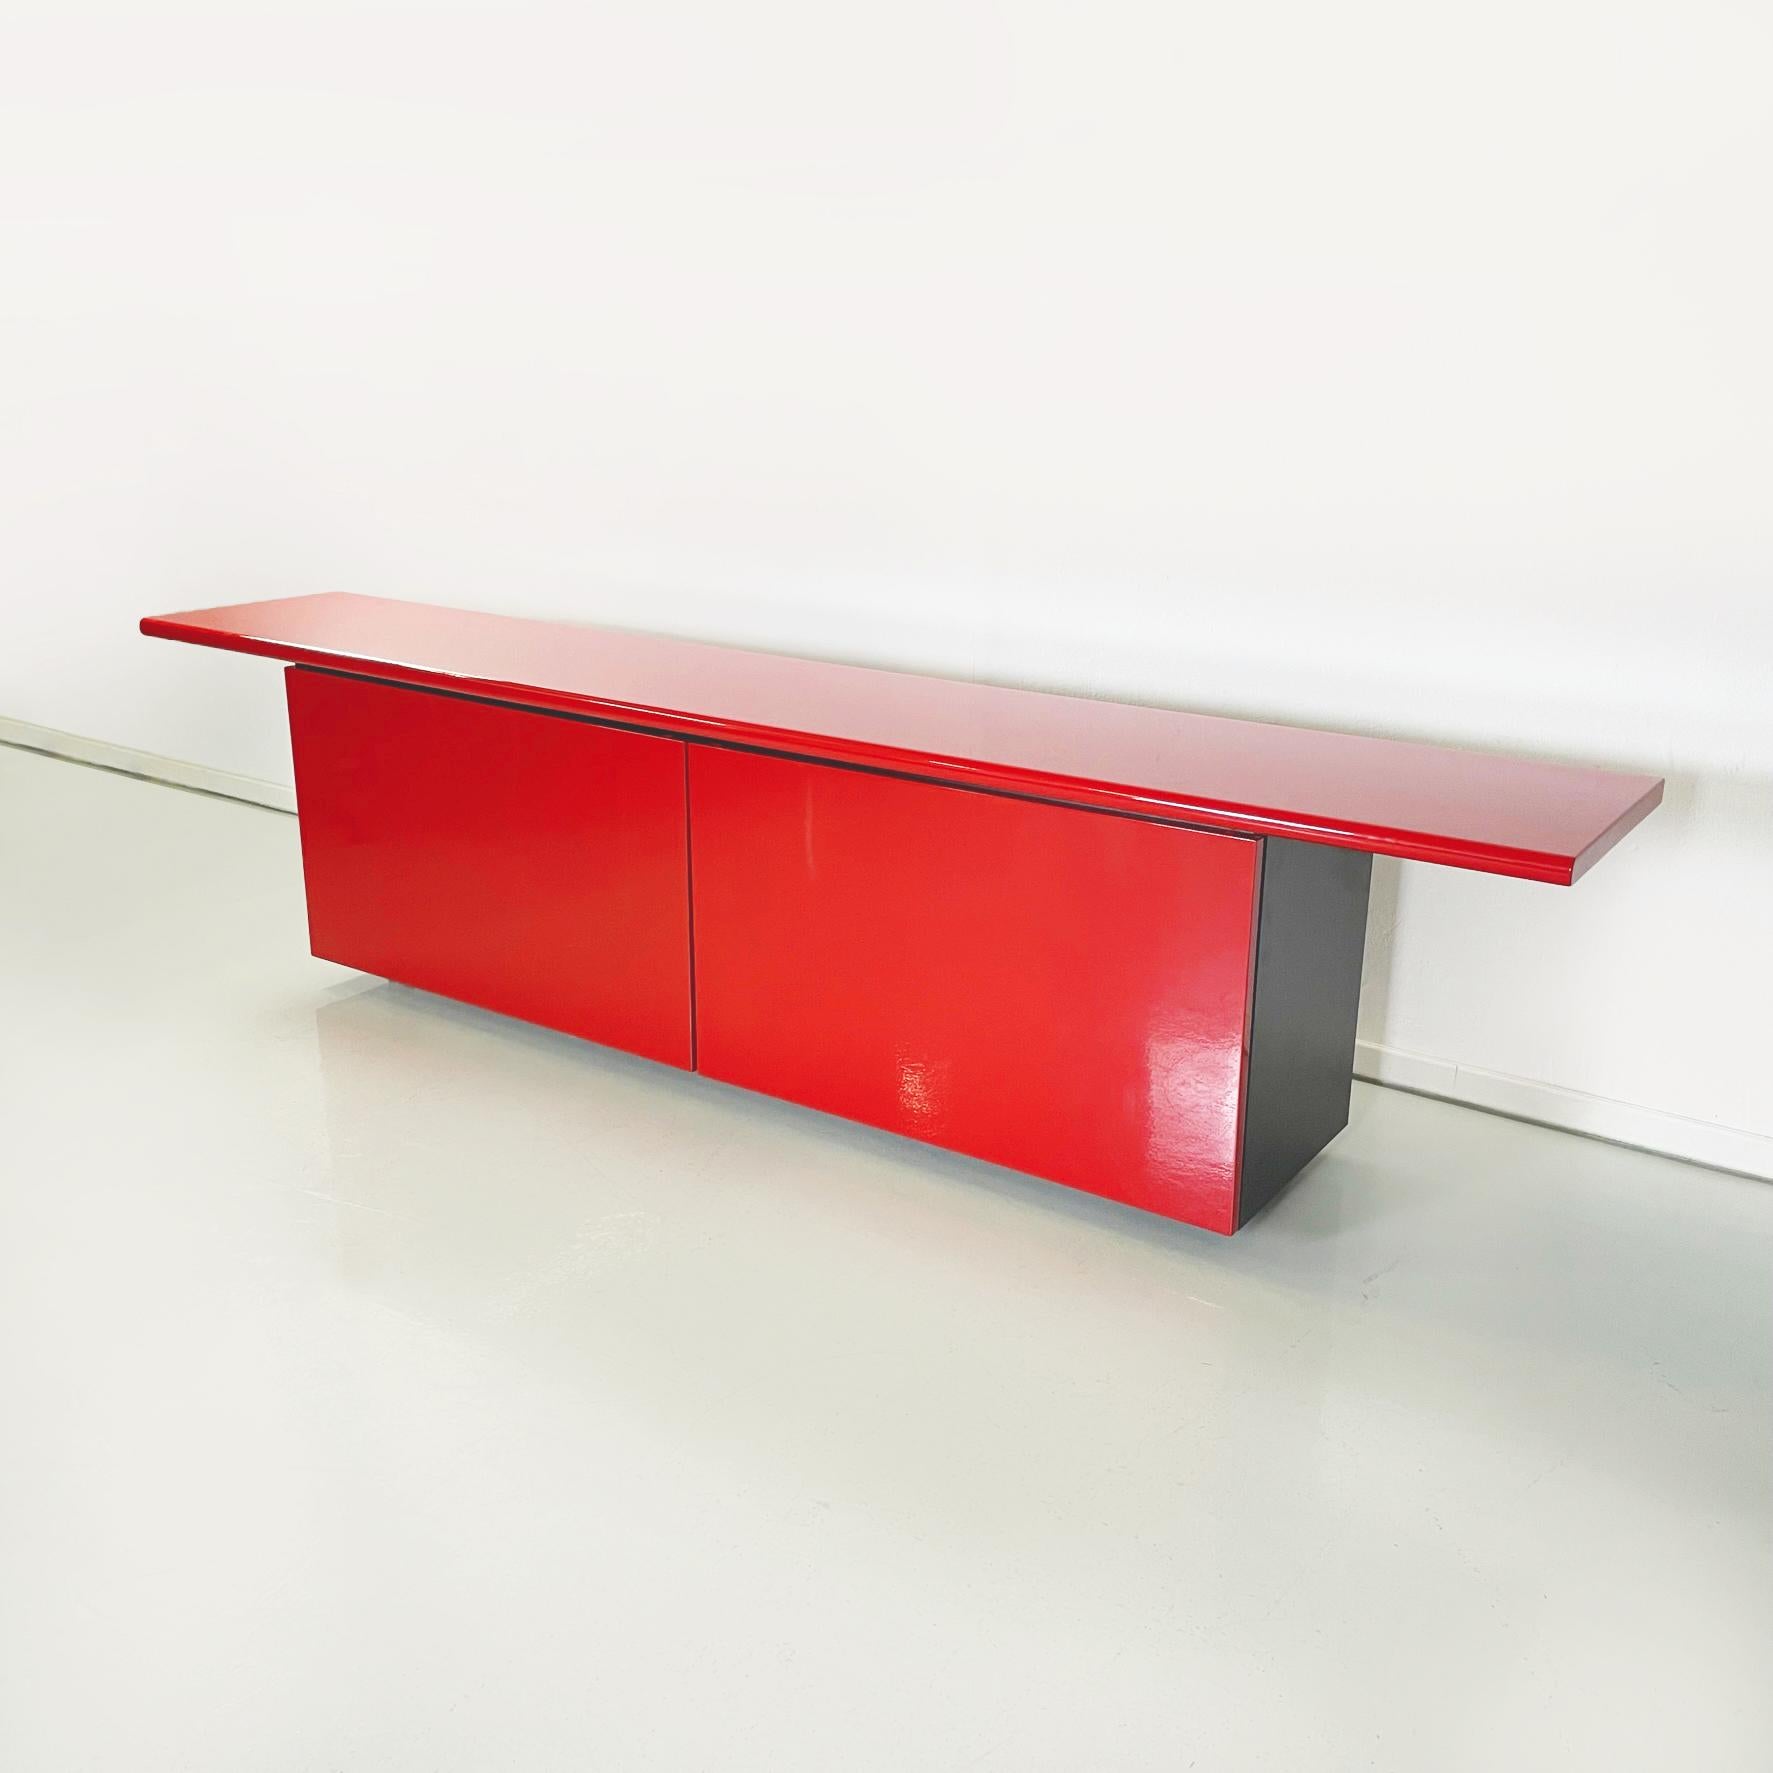 Italian Modern Red Sideboard Sheraton by Stoppino and Acerbis for Acerbis, 1977 In Good Condition For Sale In MIlano, IT